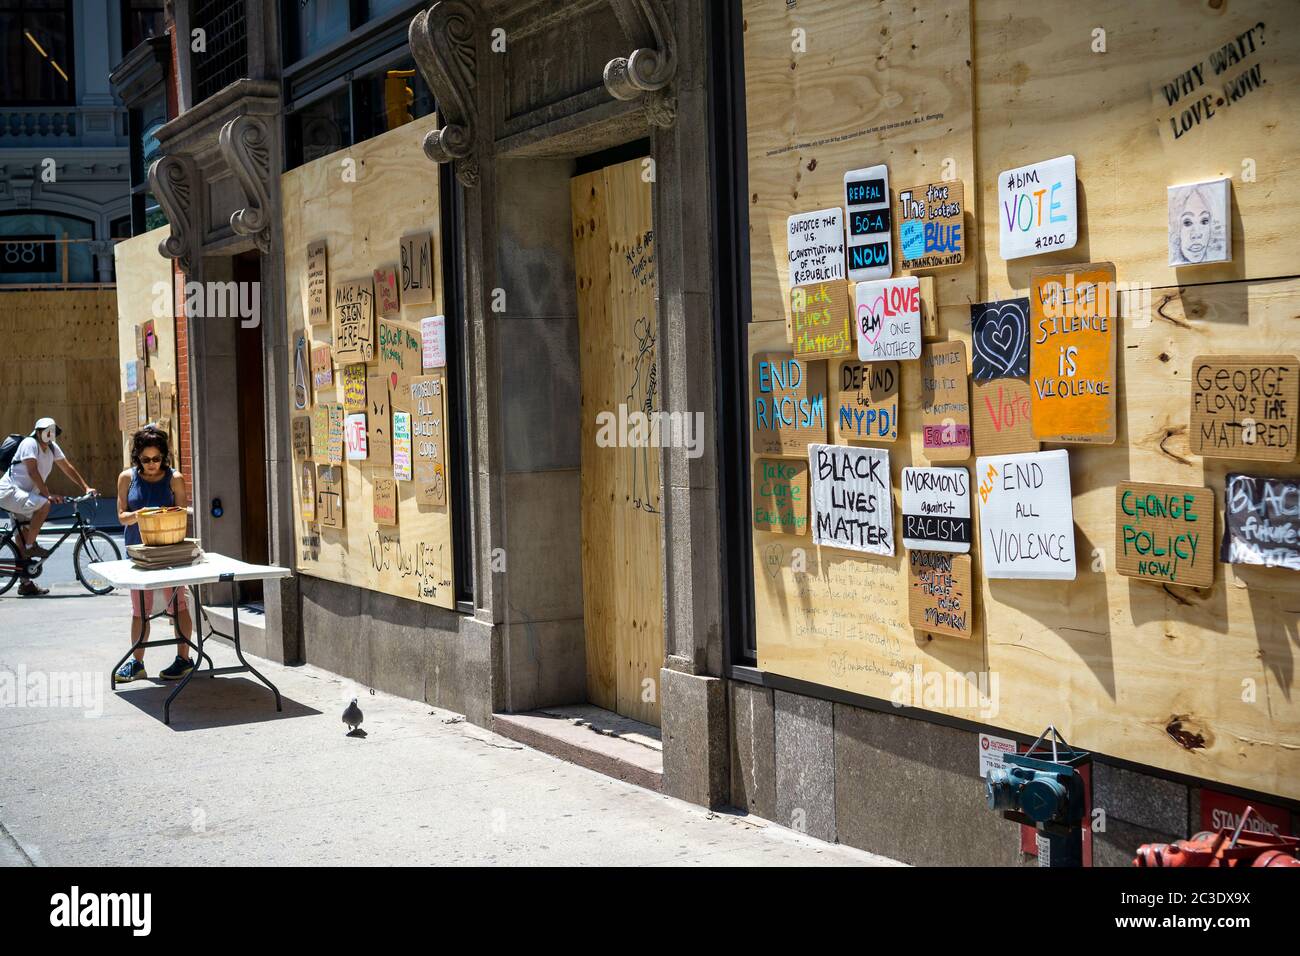 https://c8.alamy.com/comp/2C3DX9X/the-fish-eddy-store-in-the-flatiron-neighborhood-in-new-york-while-still-closed-displays-a-collection-of-black-lives-matter-diy-protest-signs-seen-on-wednesday-june-10-2020-richard-b-levine-2C3DX9X.jpg